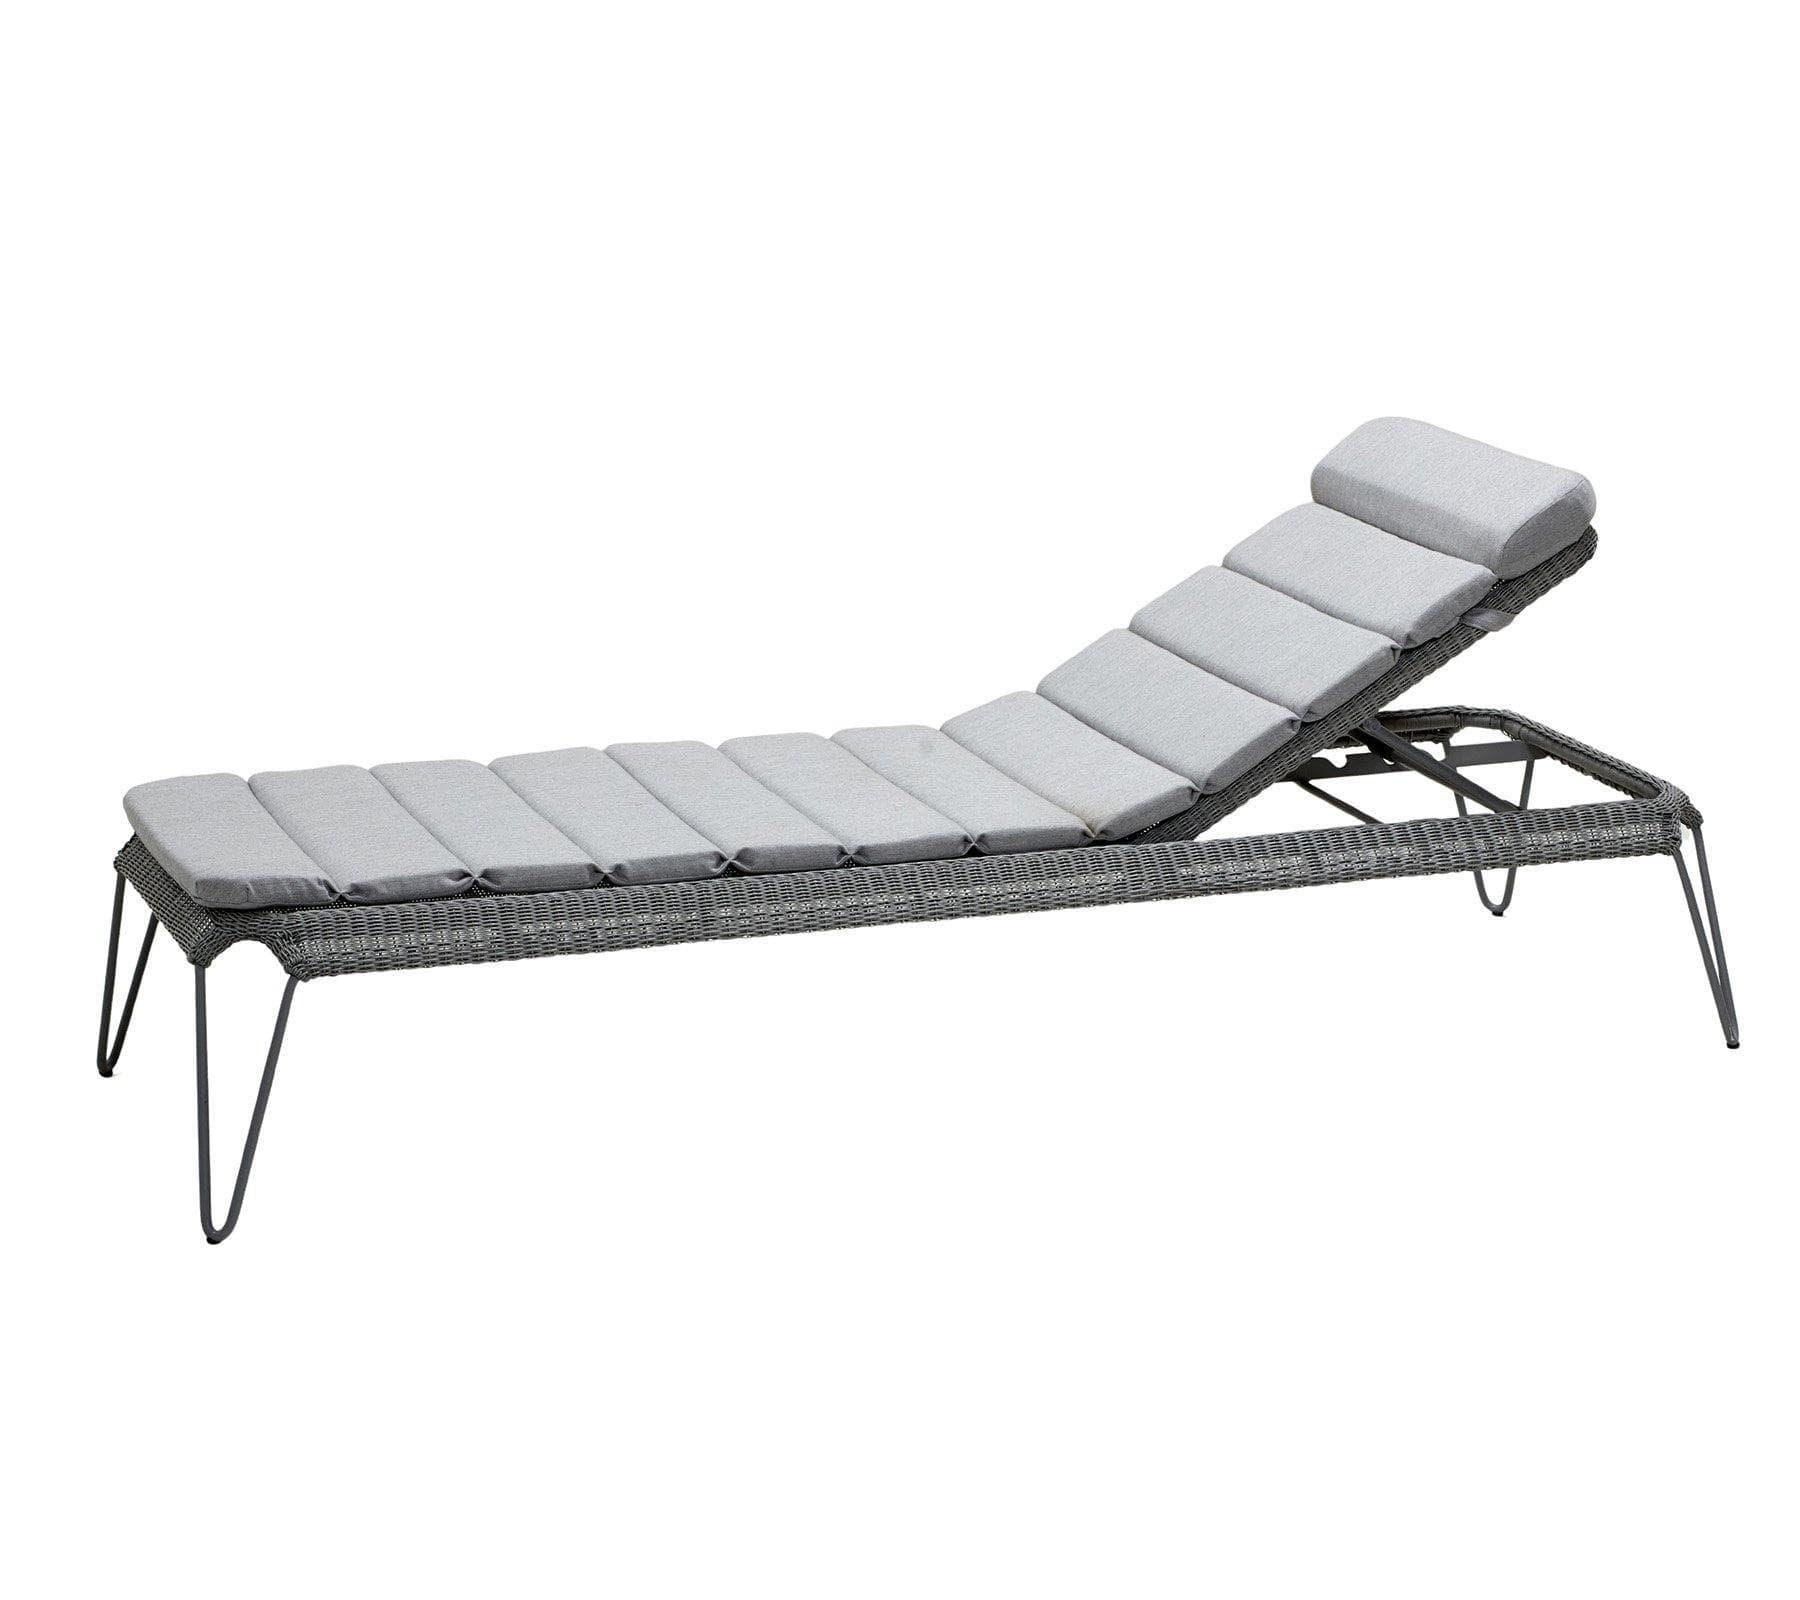 Cane-Line Denmark Chaise Lounge Light grey Breeze sunbed, stackable